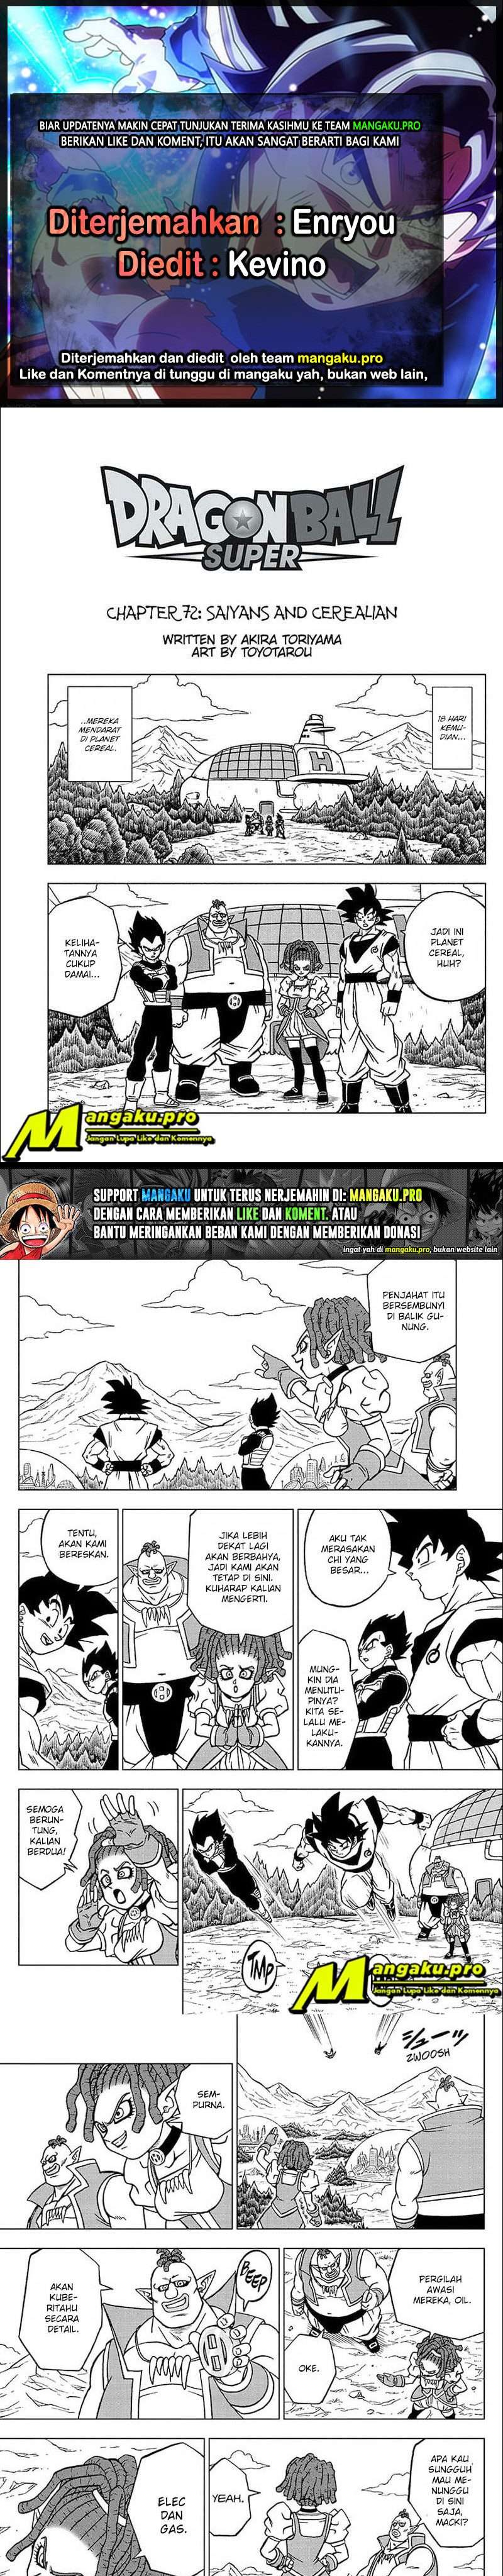 Dragon Ball Super: Chapter 72.1 - Page 1